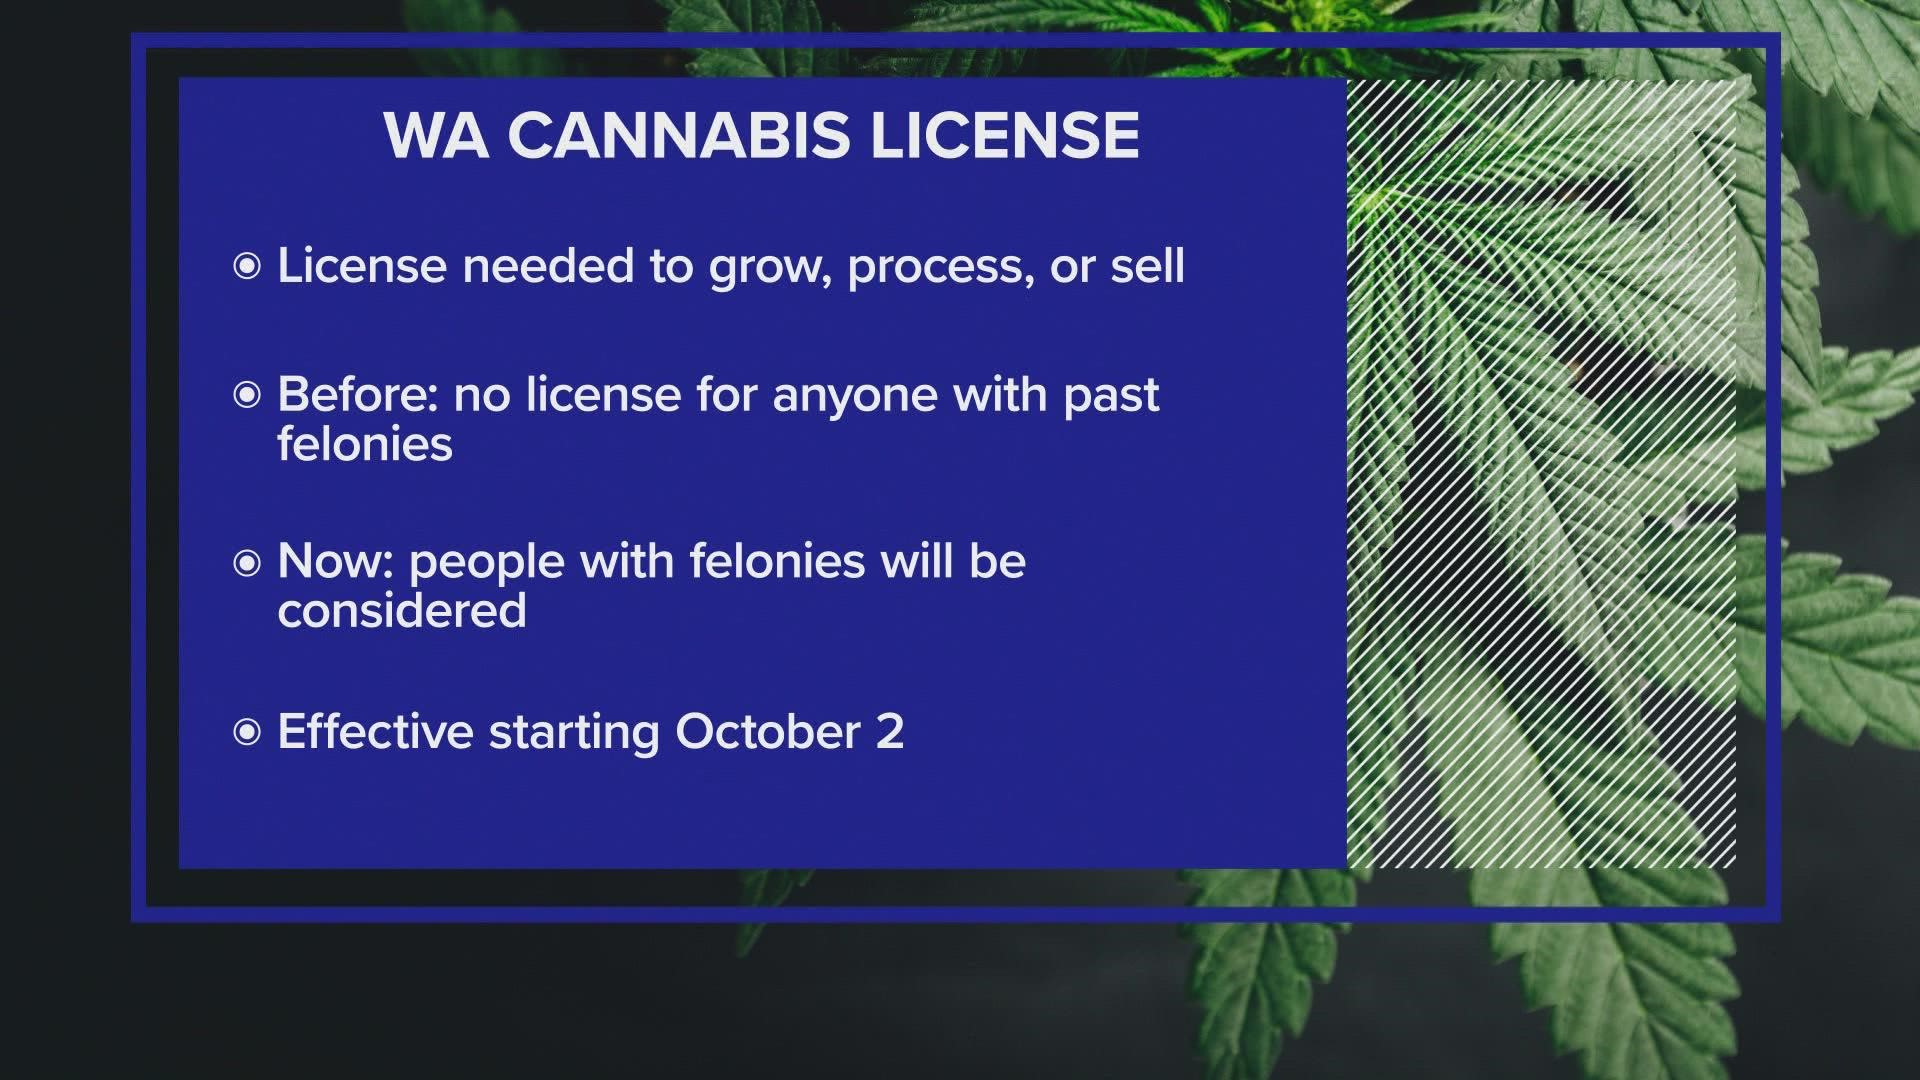 Starting Oct. 2, people who have felonies on their criminal records will be able to apply for a license to grow, process or sell marijuana.